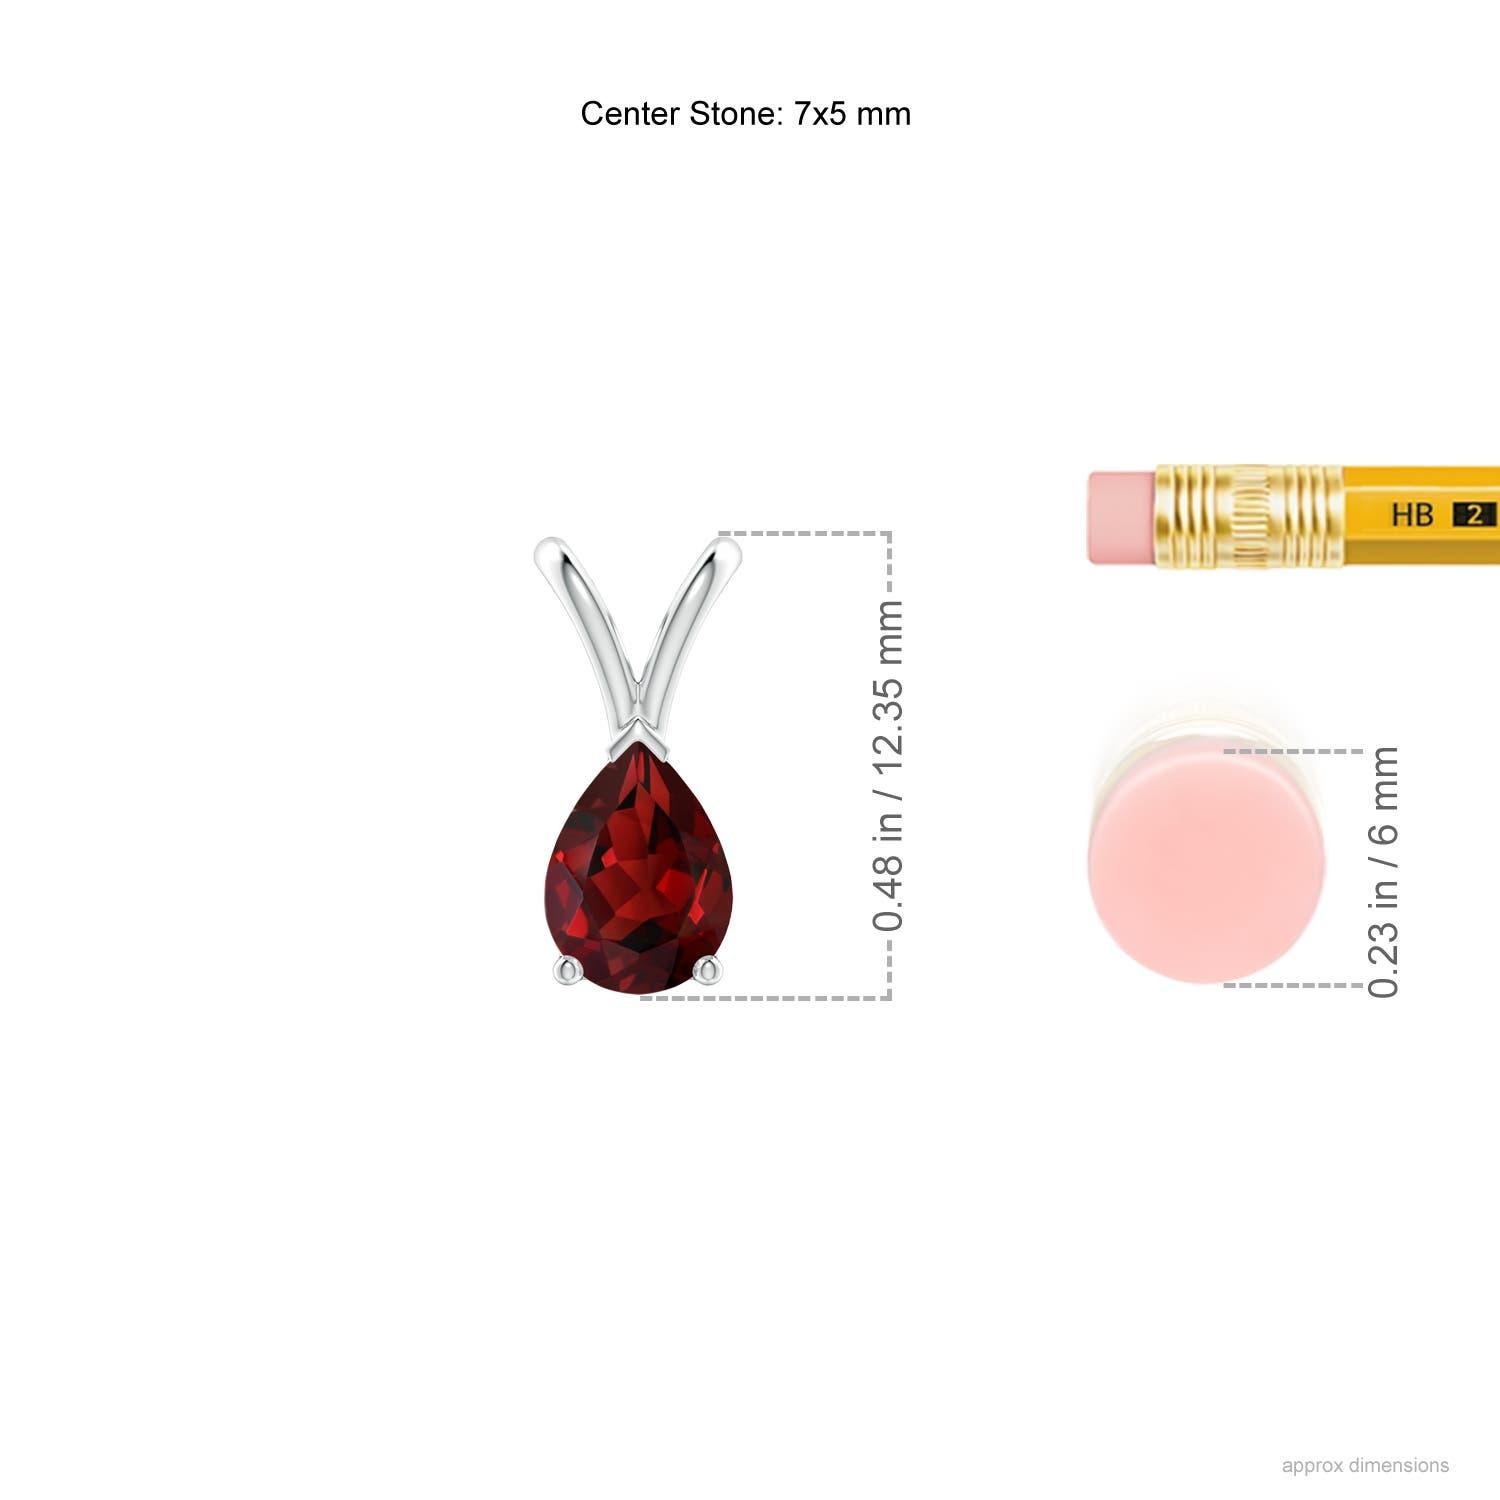 This platinum classic solitaire garnet pendant looks elegant in its minimalistic design. Linked to a shiny v-bale, the magnificent pear-shaped garnet captivates with its intense red hue. The three-prong setting of the gem showcases its exceptional